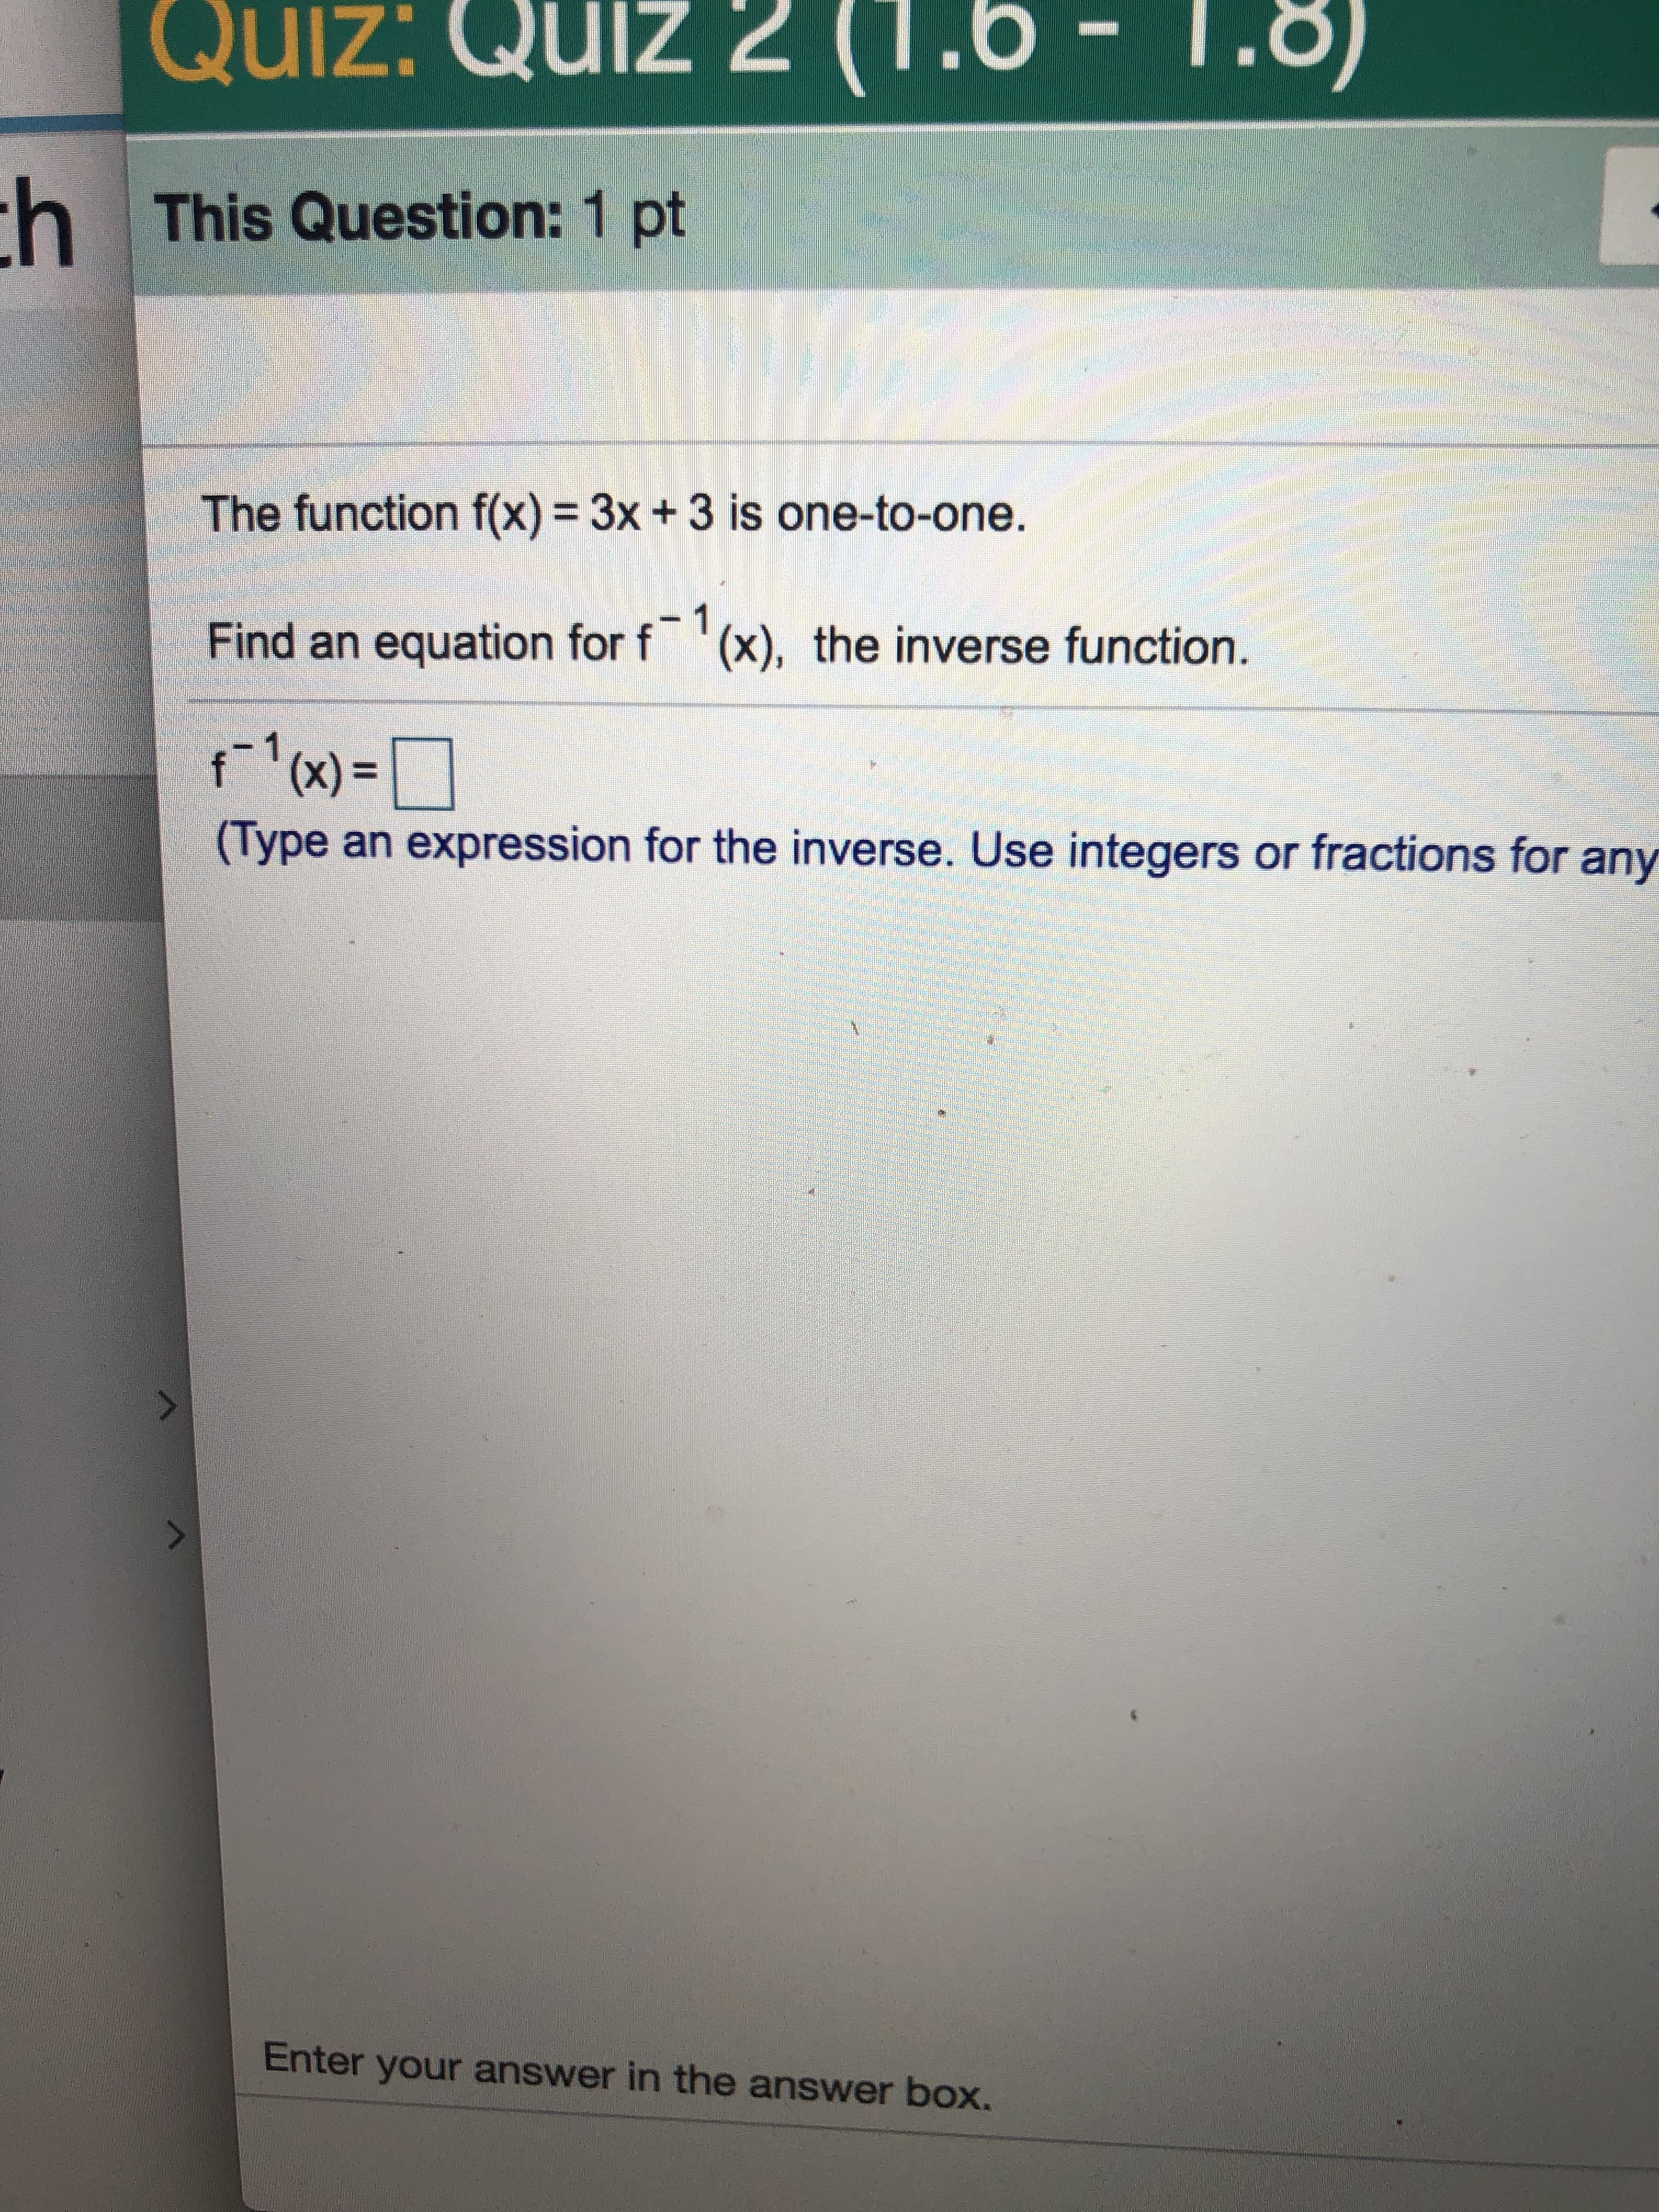 Quiz: Qulz 2 (1.6 1.8)
h This Question: 1 pt
The function f(x)3x + 3 is one-to-one.
Find an equation for f 1x), the inverse function.
(Type an expression for the inverse. Use integers or fractions for any
Enter your answer in the answer box.
